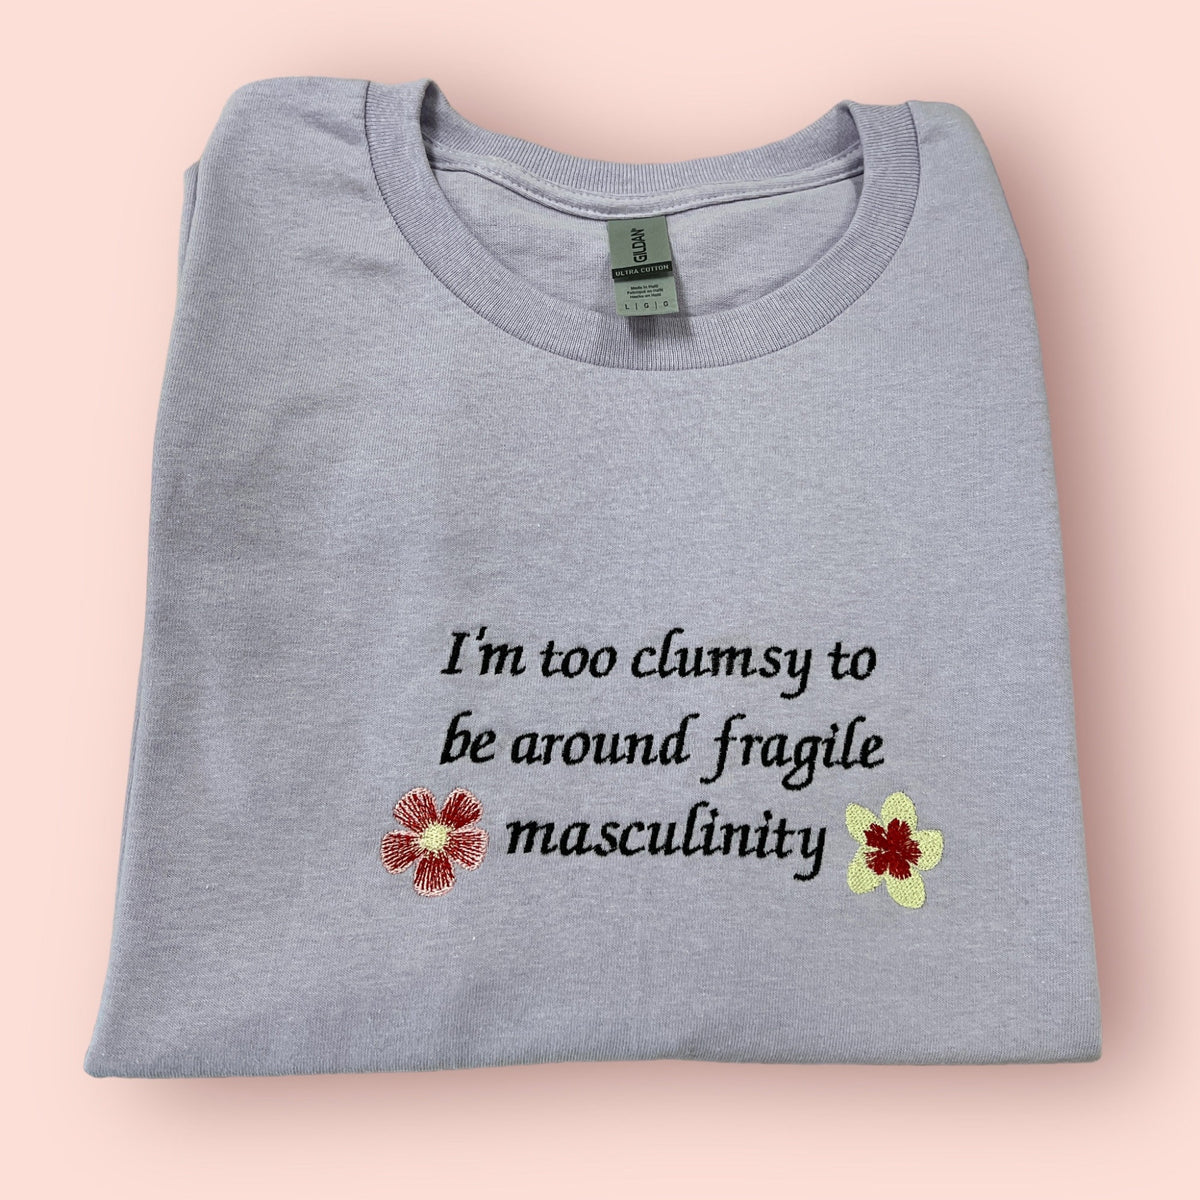 I'm Too Clumsy To Be Around Fragile Masculinity Embroidered Unisex T-Shirt or Sweatshirt